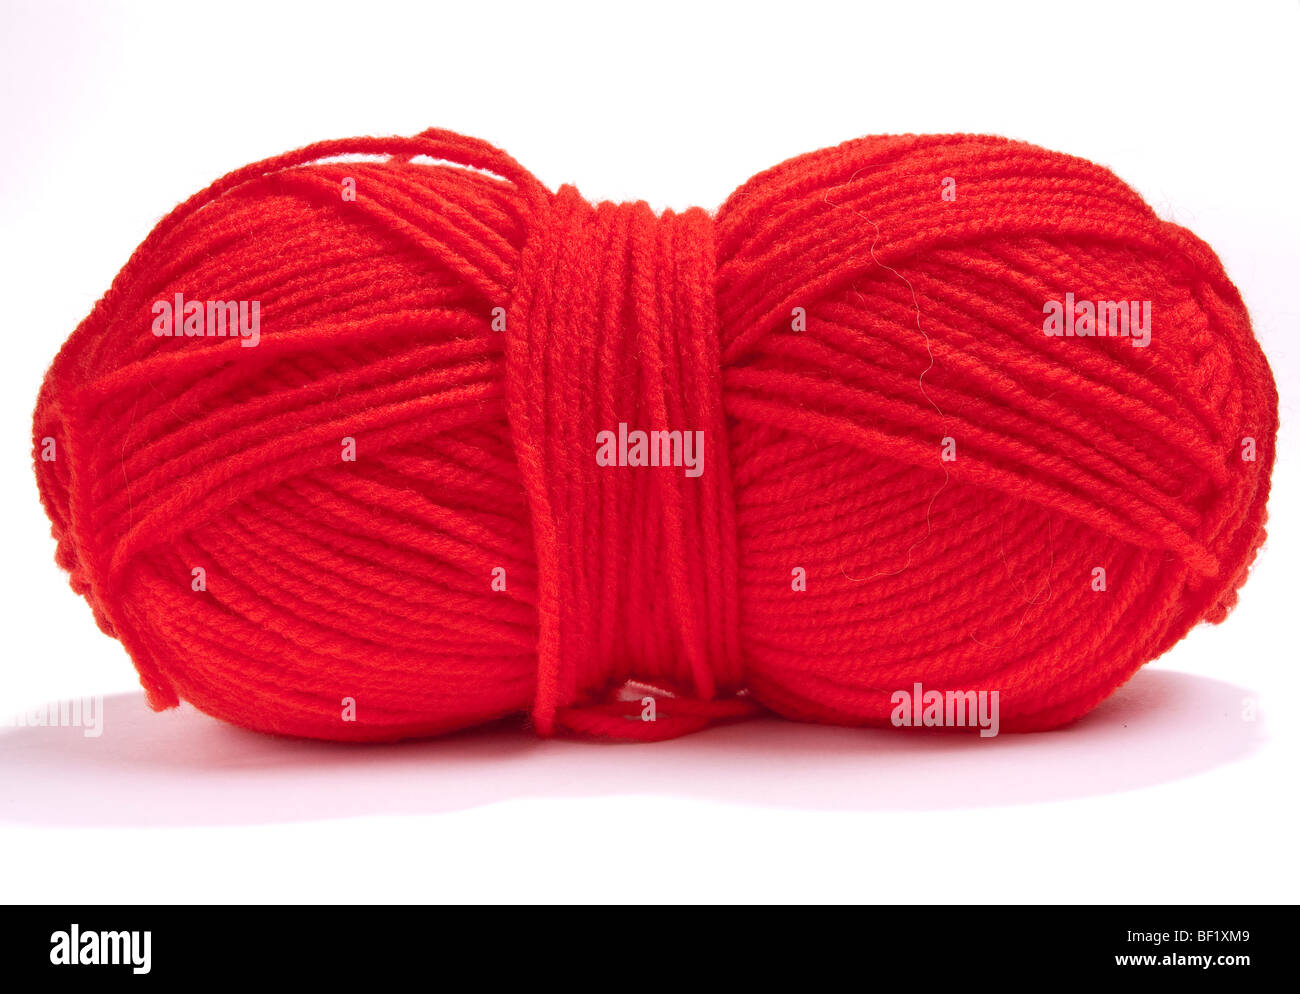 Large ball of red mohair wool or yarn  against white background. Stock Photo